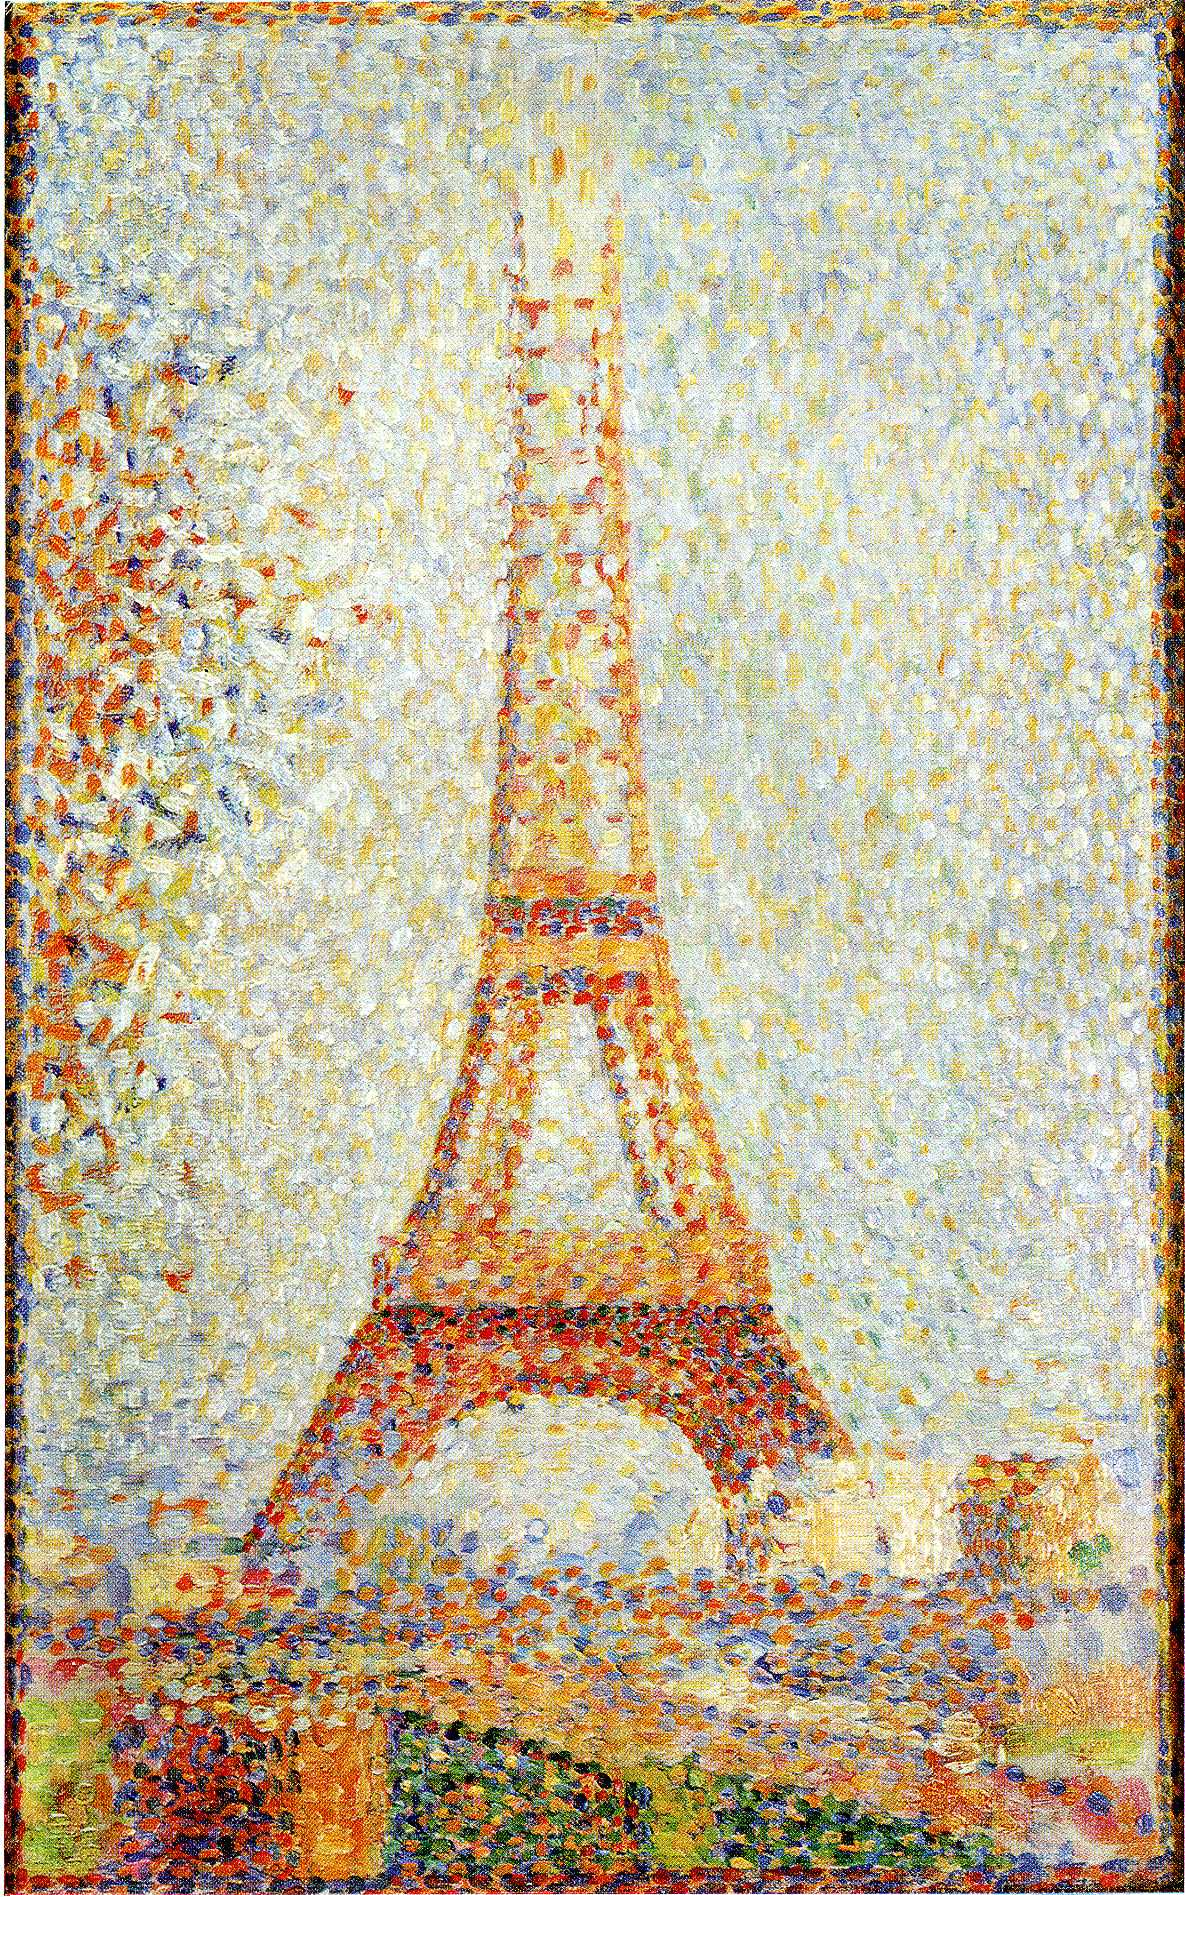 The Eiffel Tower by Georges Seurat - 1889 - 24 x 15 cm de Young Museum